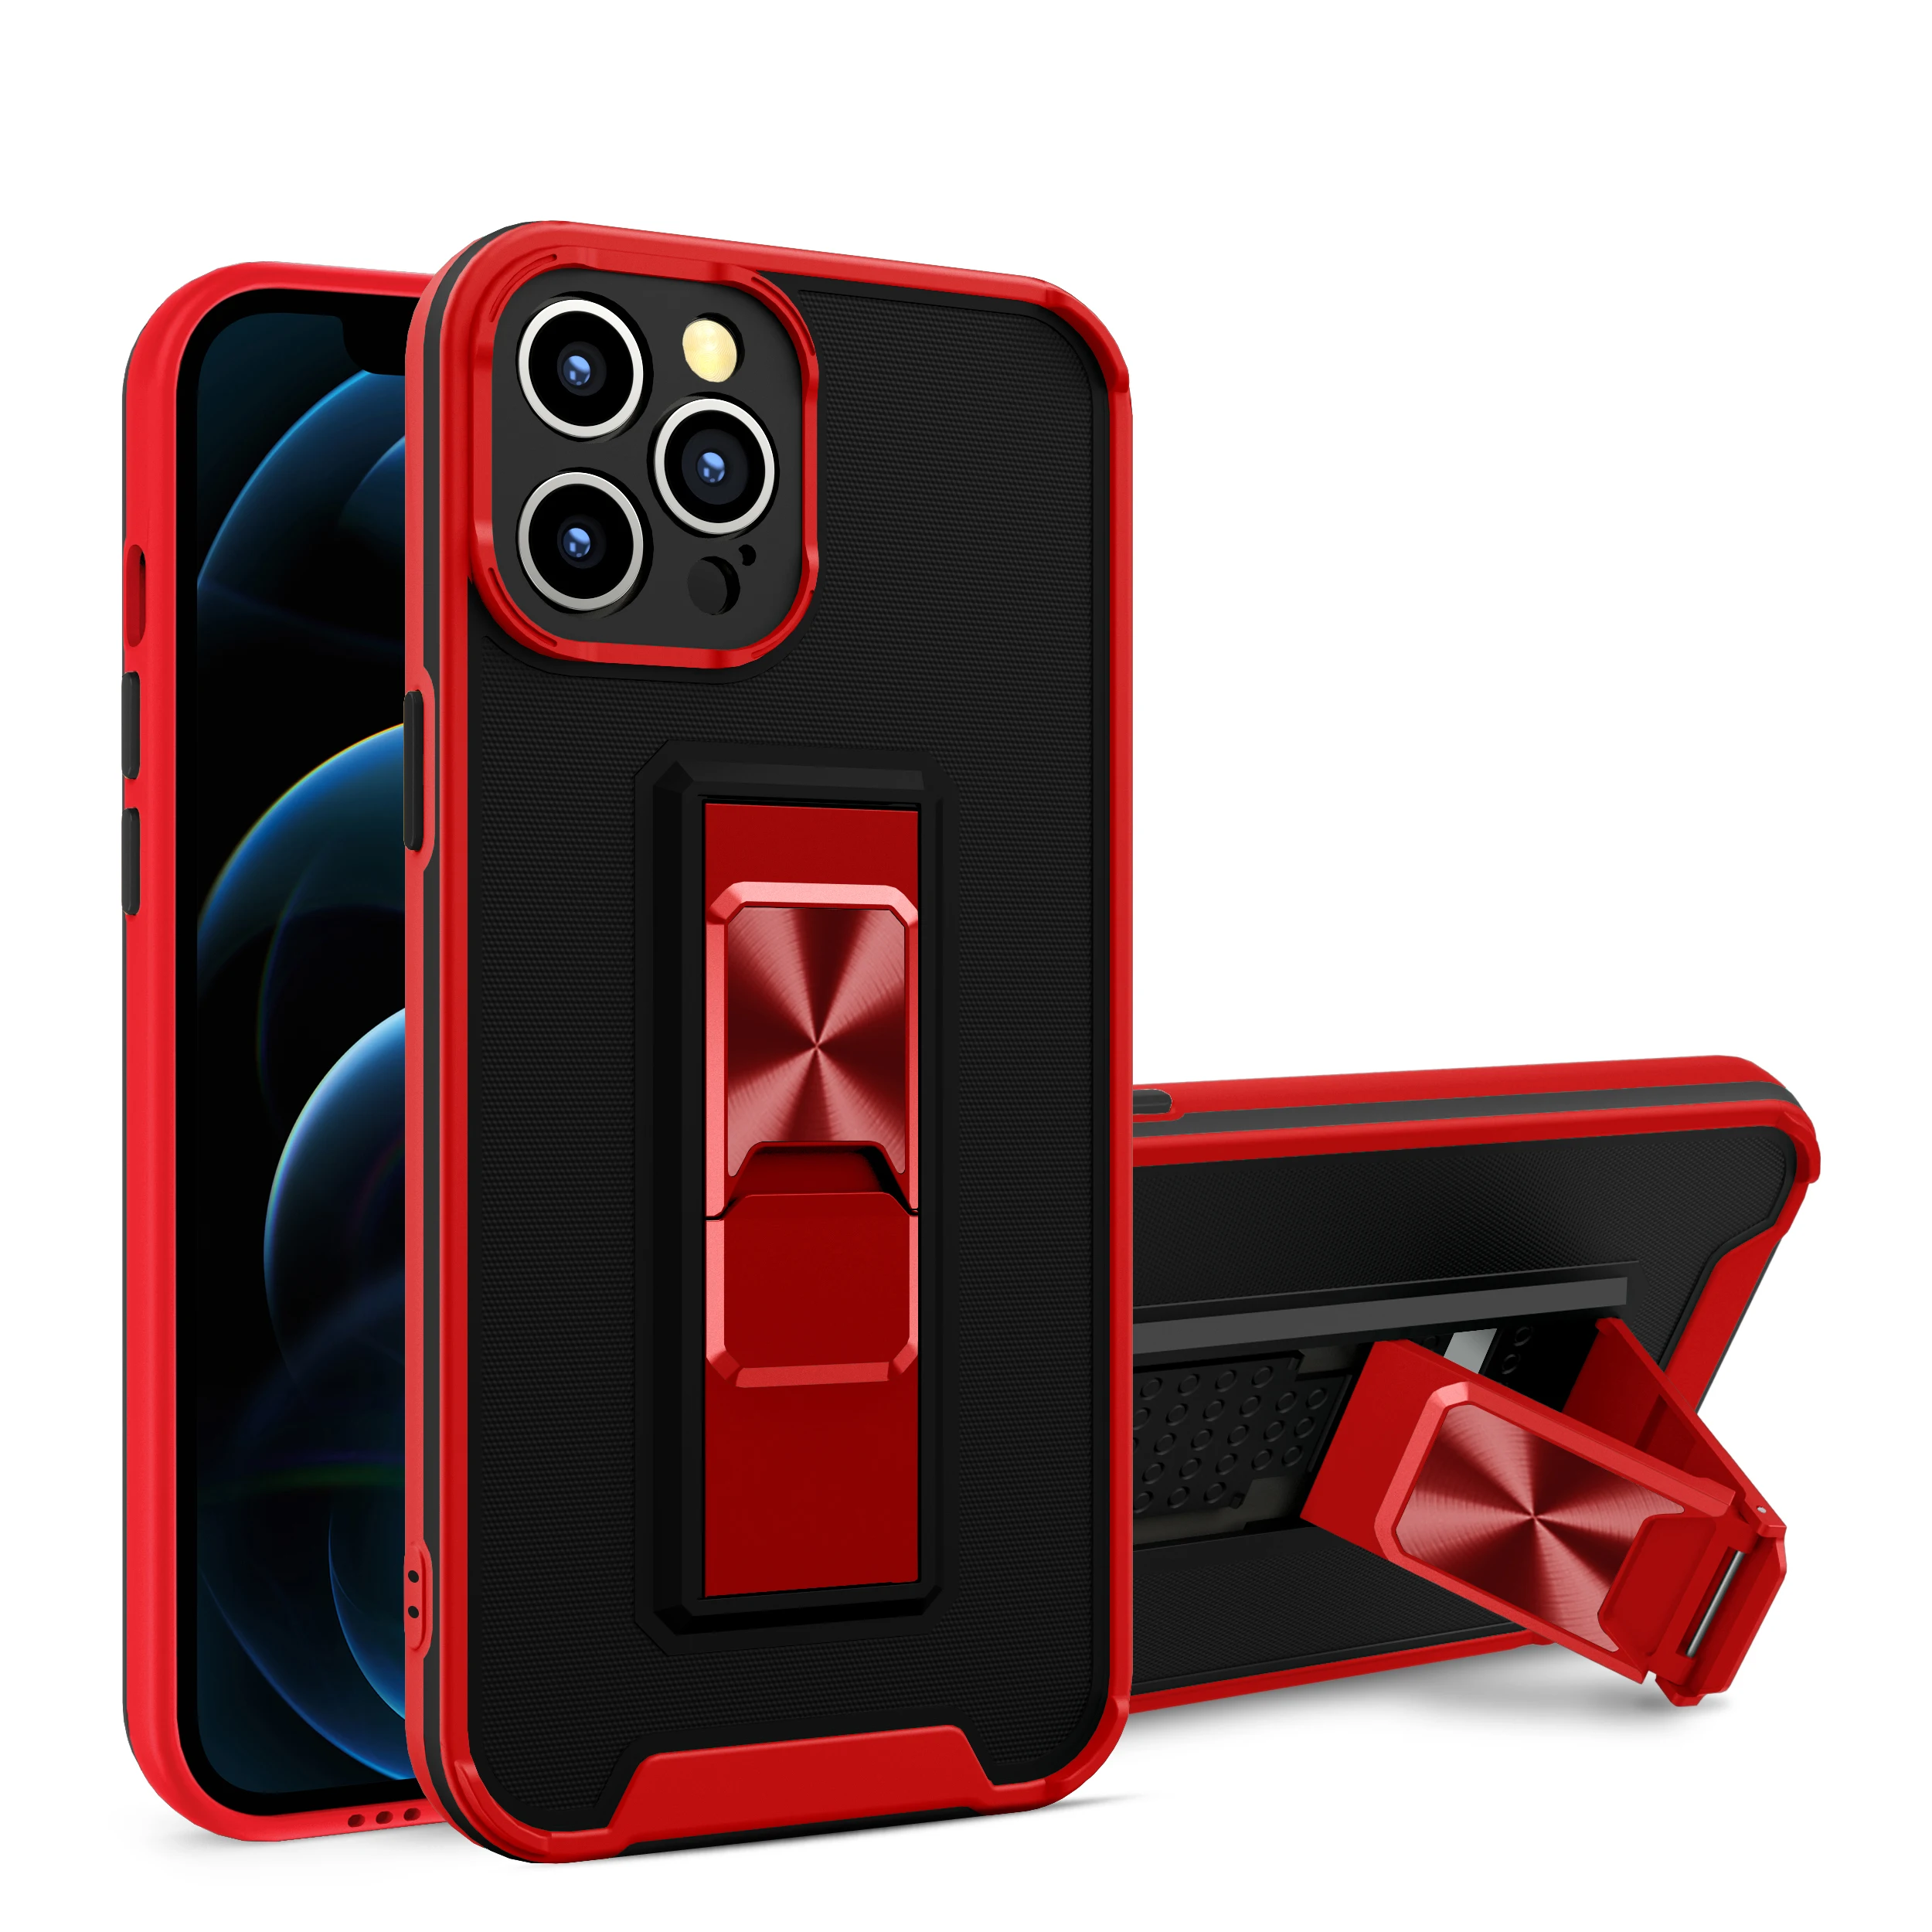 

Armor Case Magnetic Car Bracket Shock Protection Mobile Phone Case For Ipone13 promax Iphone13 6.1 Iphone 13 pro Iphone 13mini